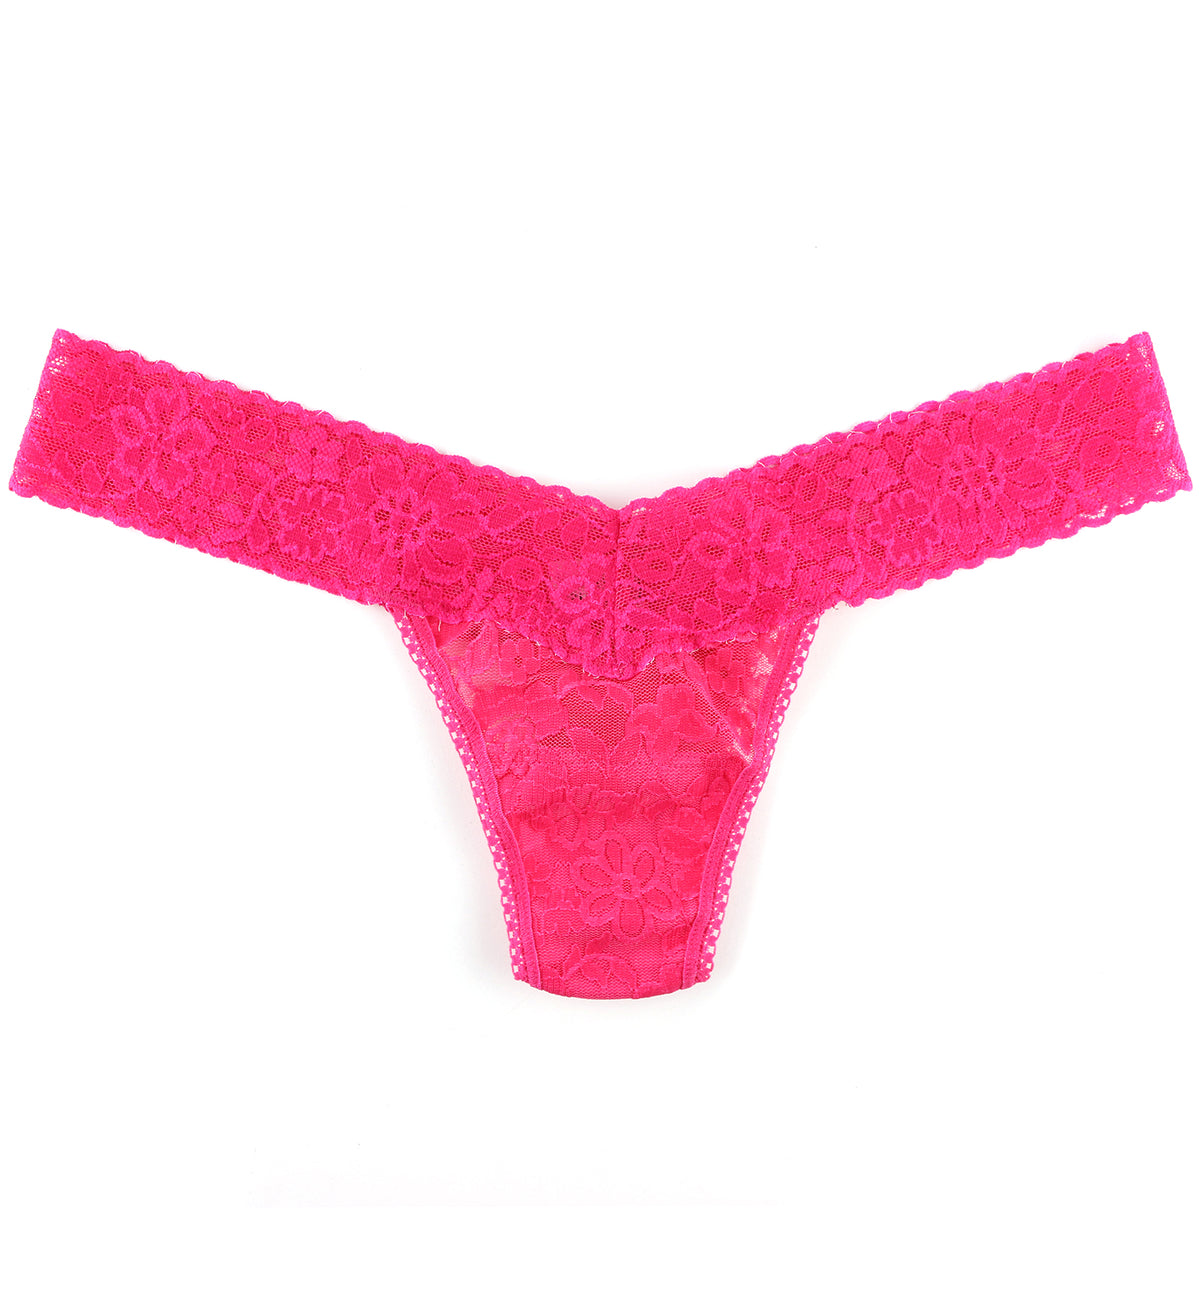 Hanky Panky Daily Lace Low Rise Thong (771001P),Starburst - Starburst,One Size